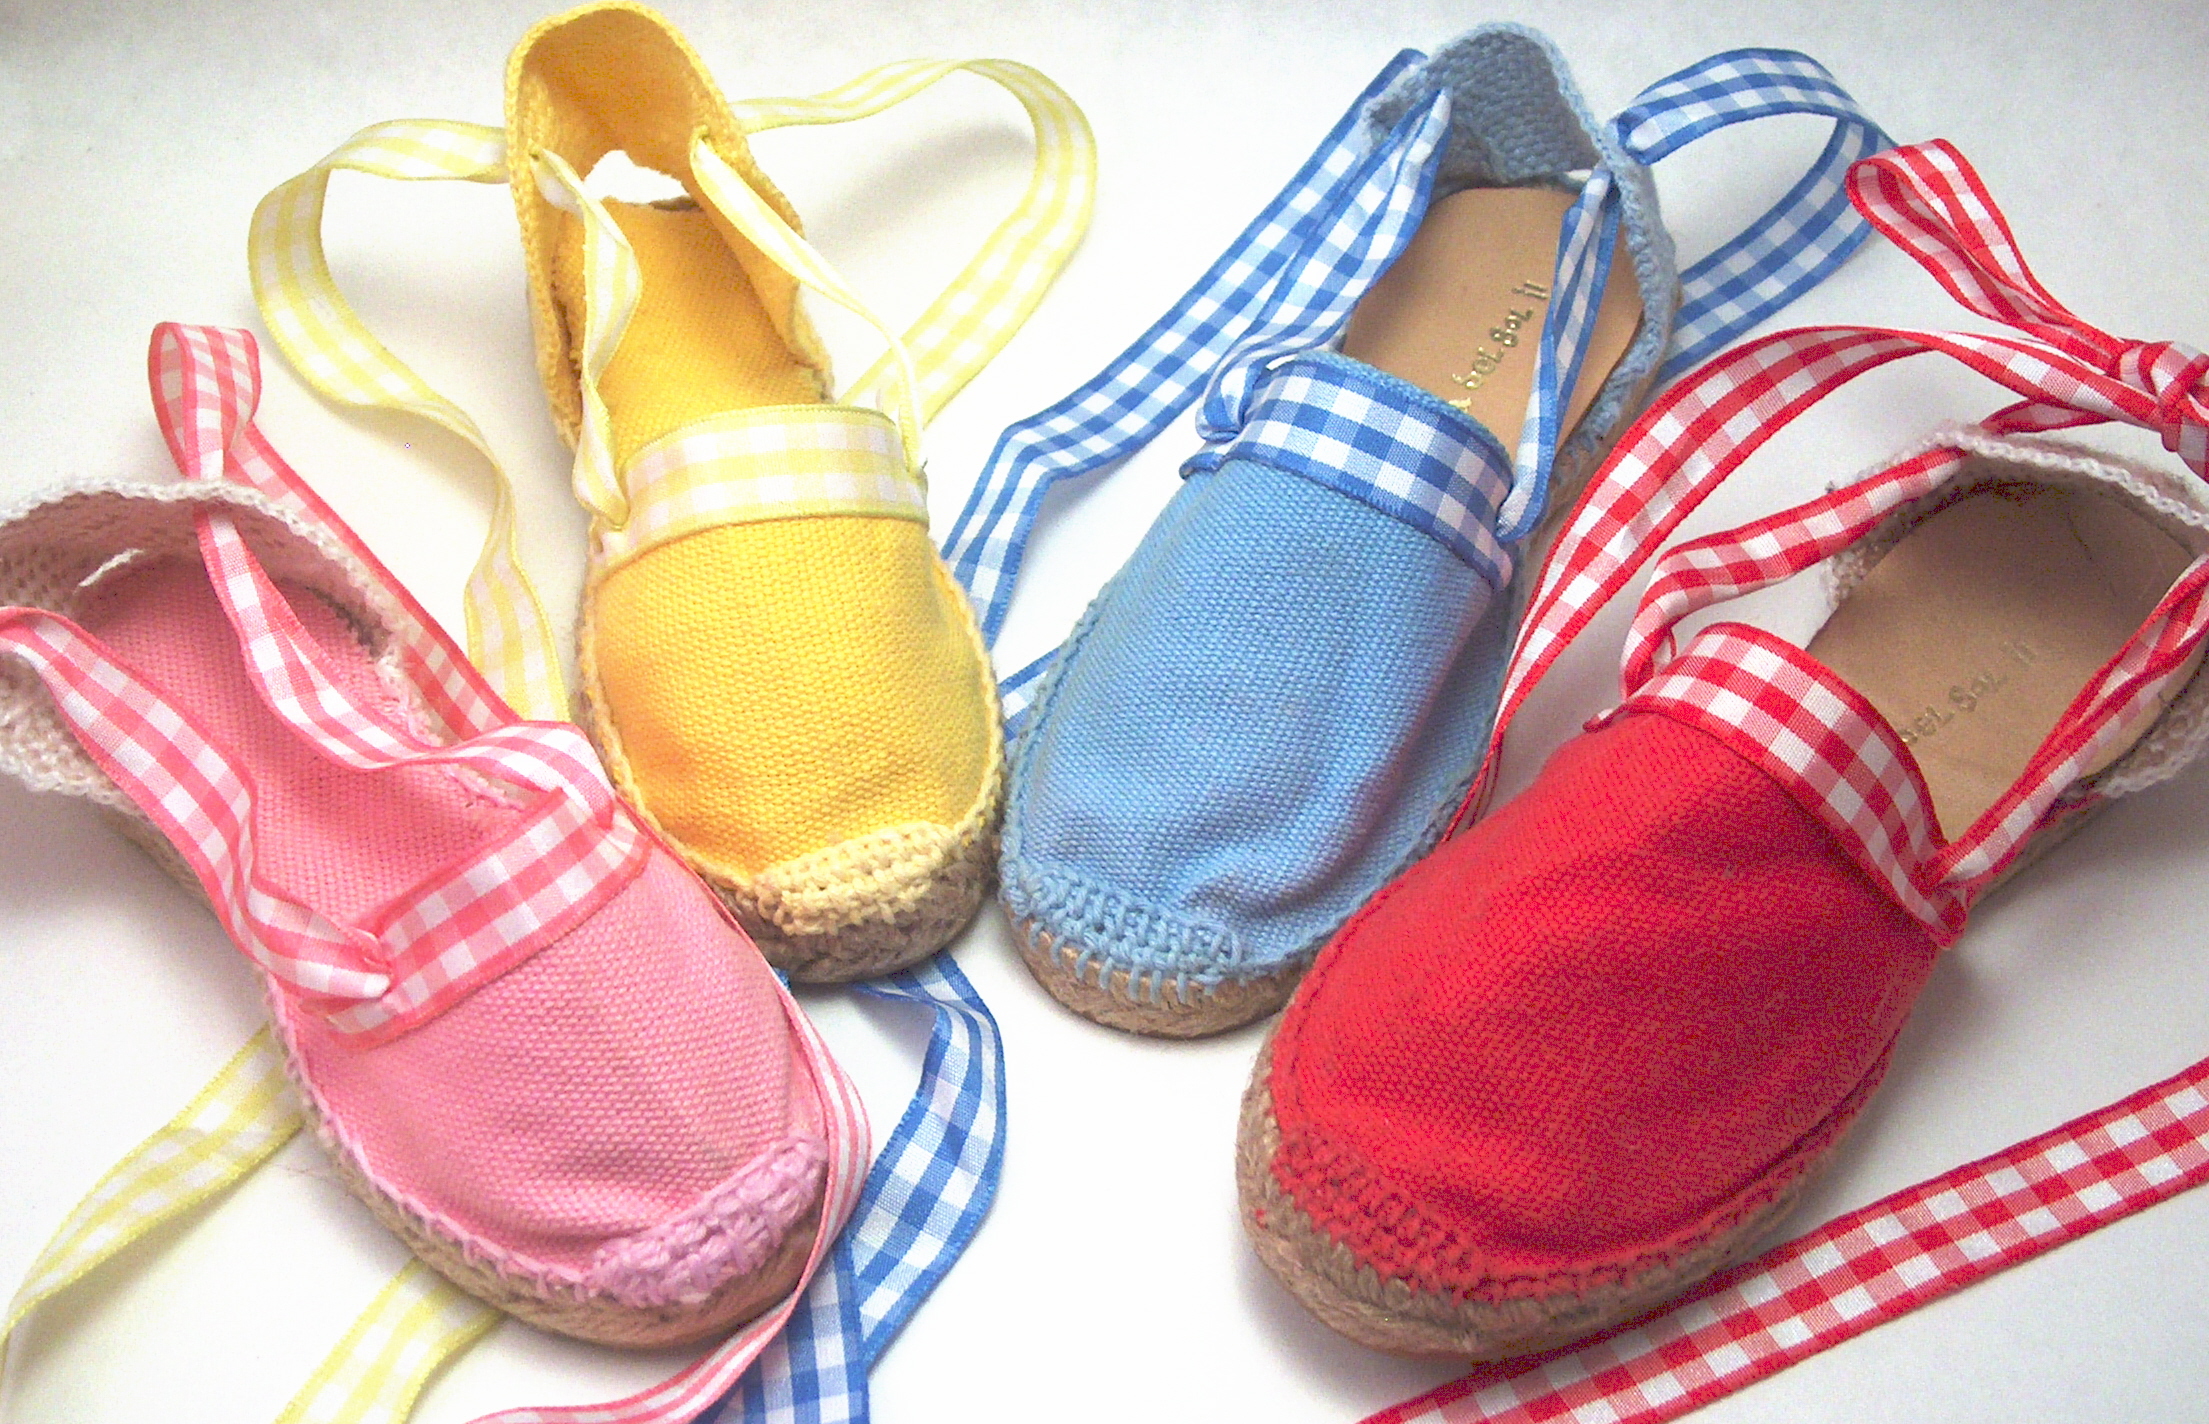 yellow gingham shoes